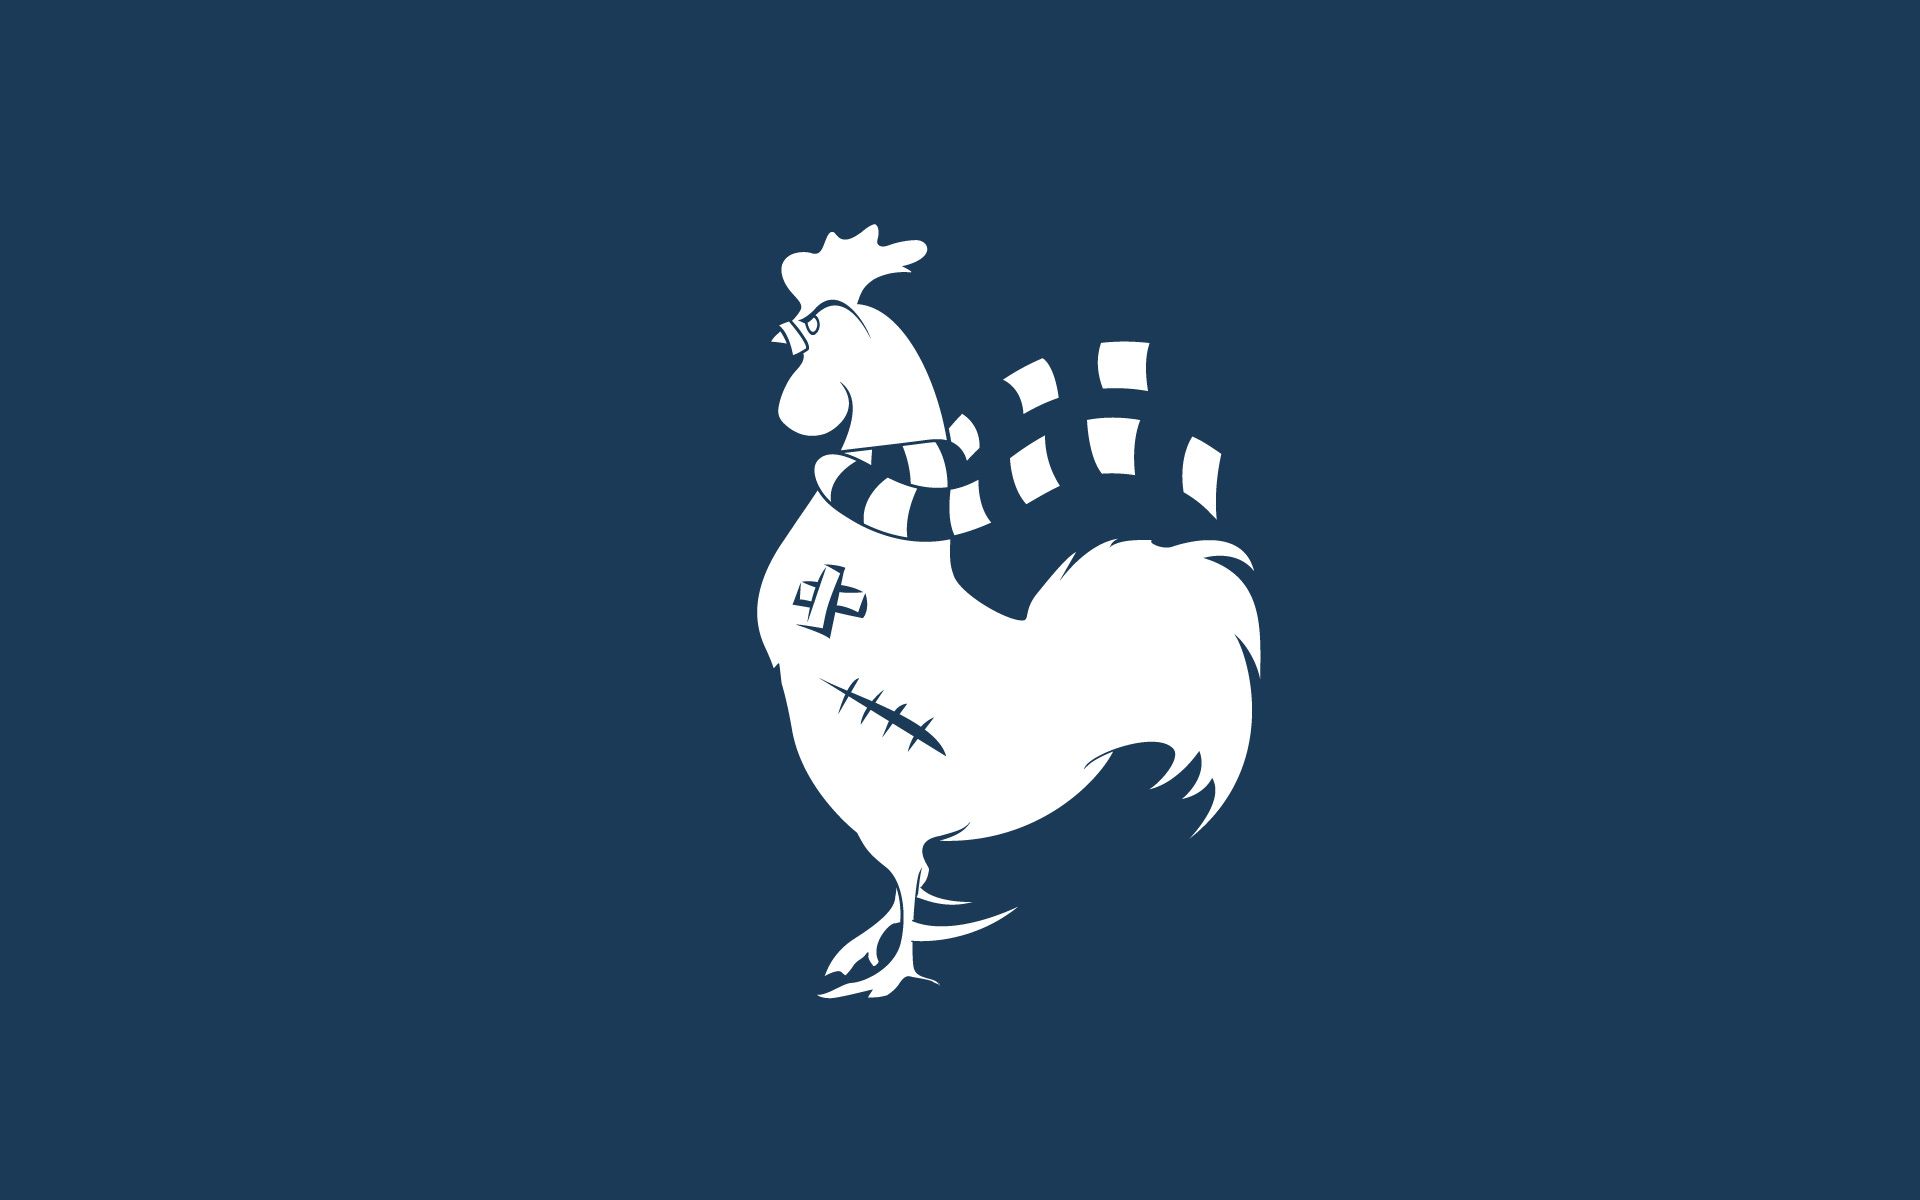 Backgrounds & Wallpapers The Fighting Cock - Tottenham Hotspur